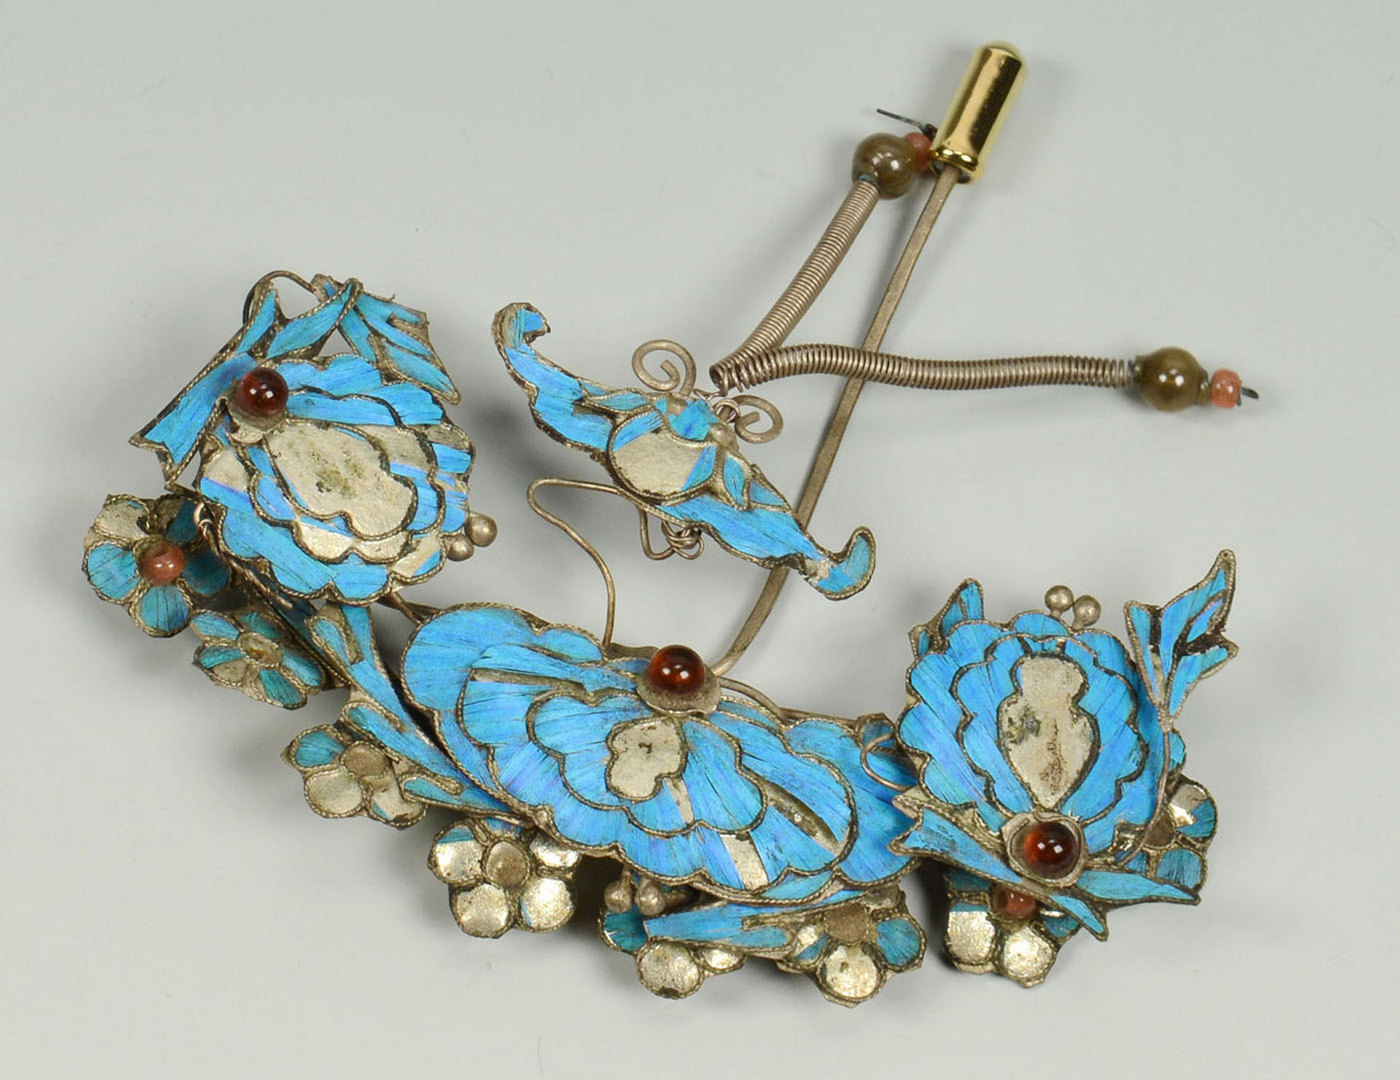 Lot 2: 3 Chinese Kingfisher Ornaments